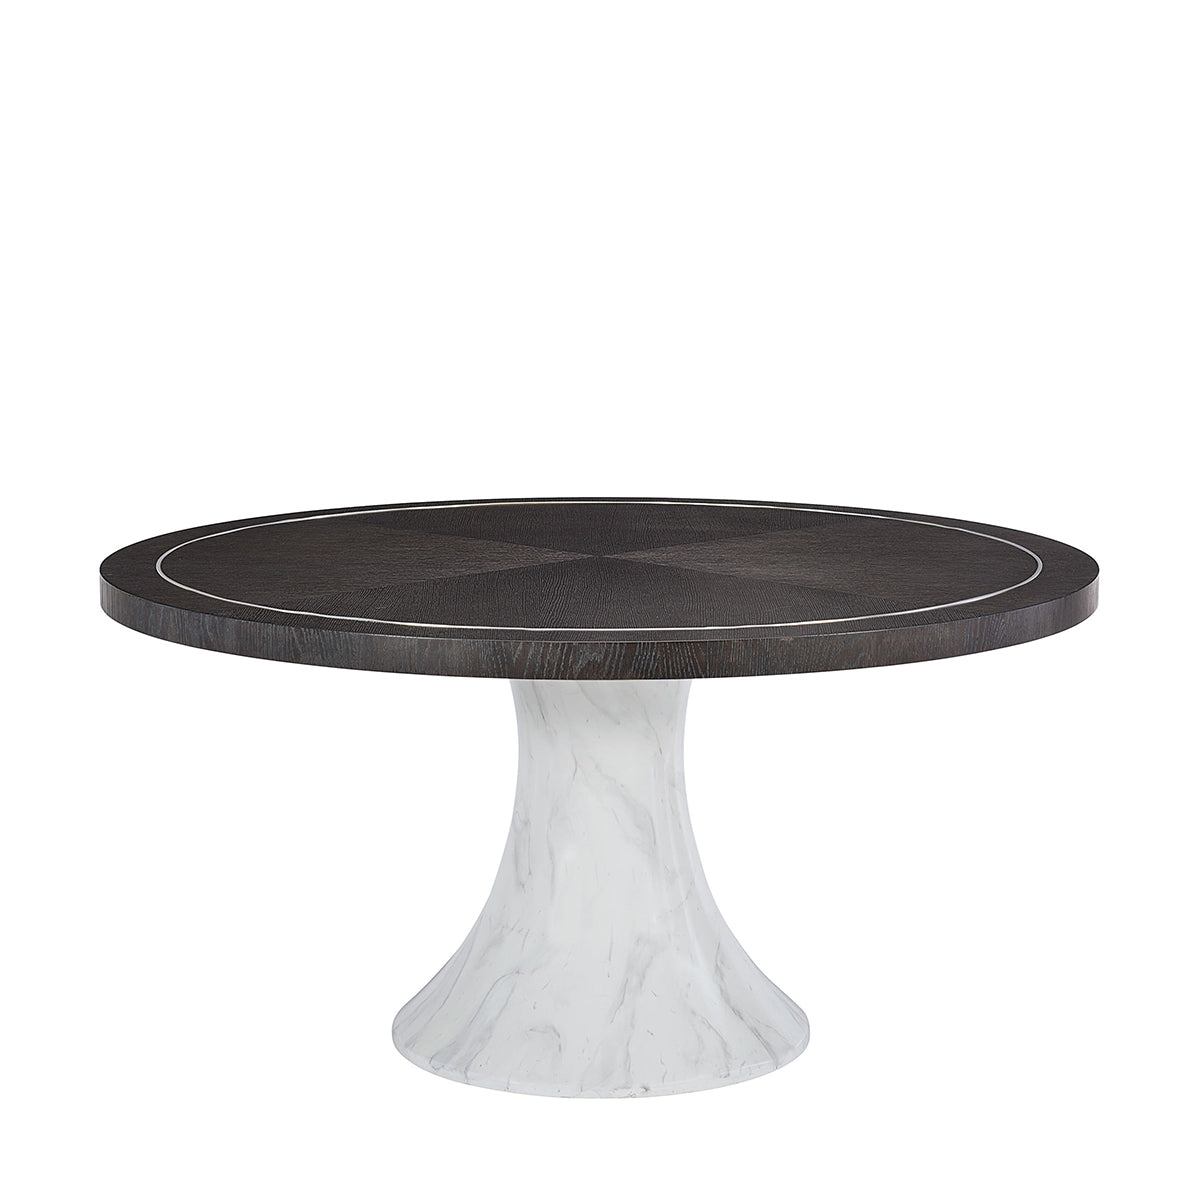 DECORAGE ROUND DINING TABLE